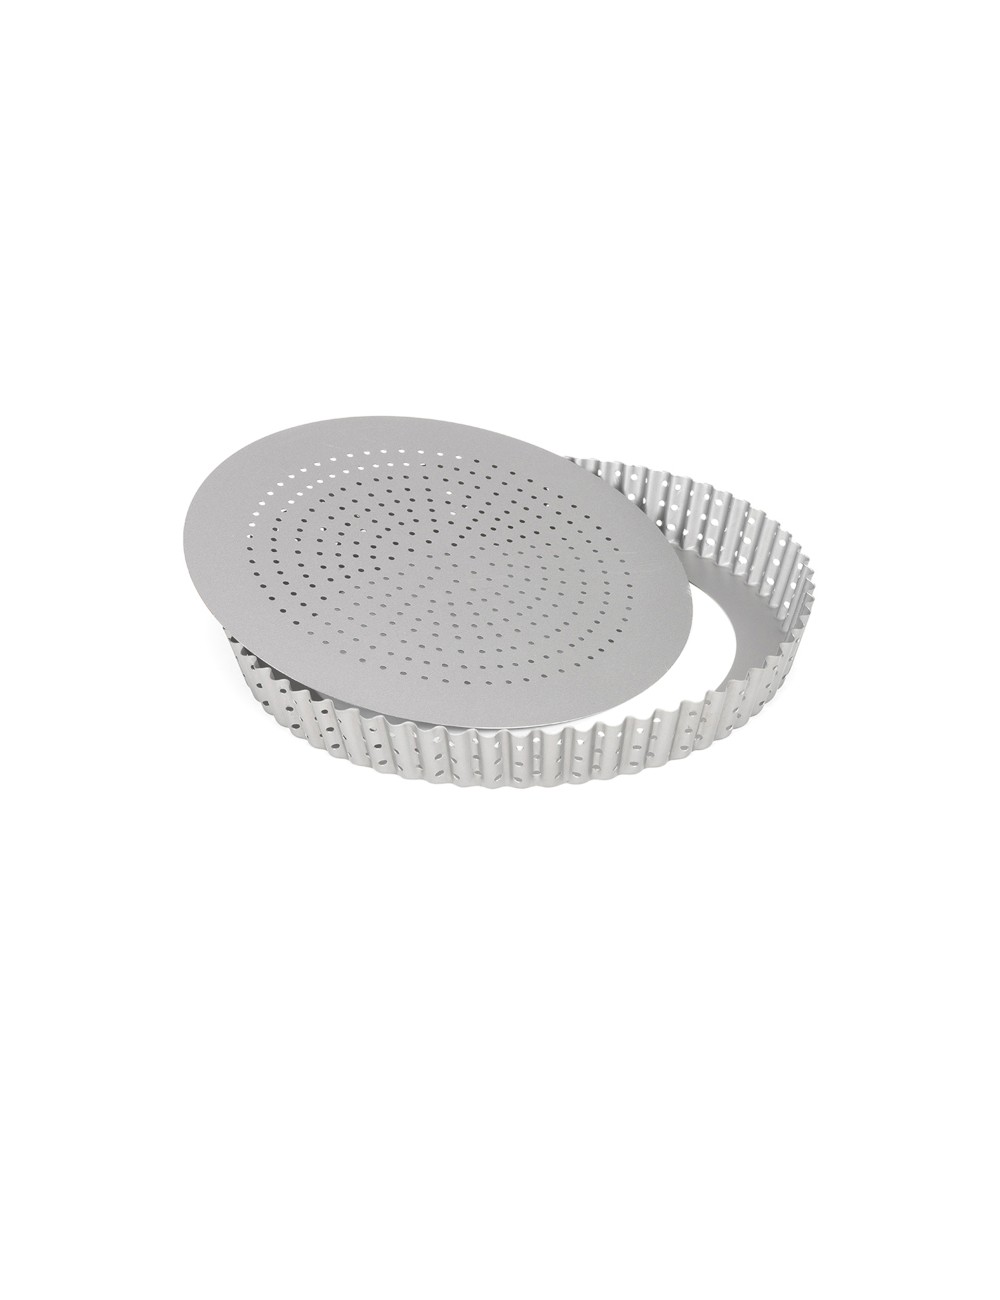 NON-STICK PERFORATED TART MOULD - REMOVABLE BOTTOM